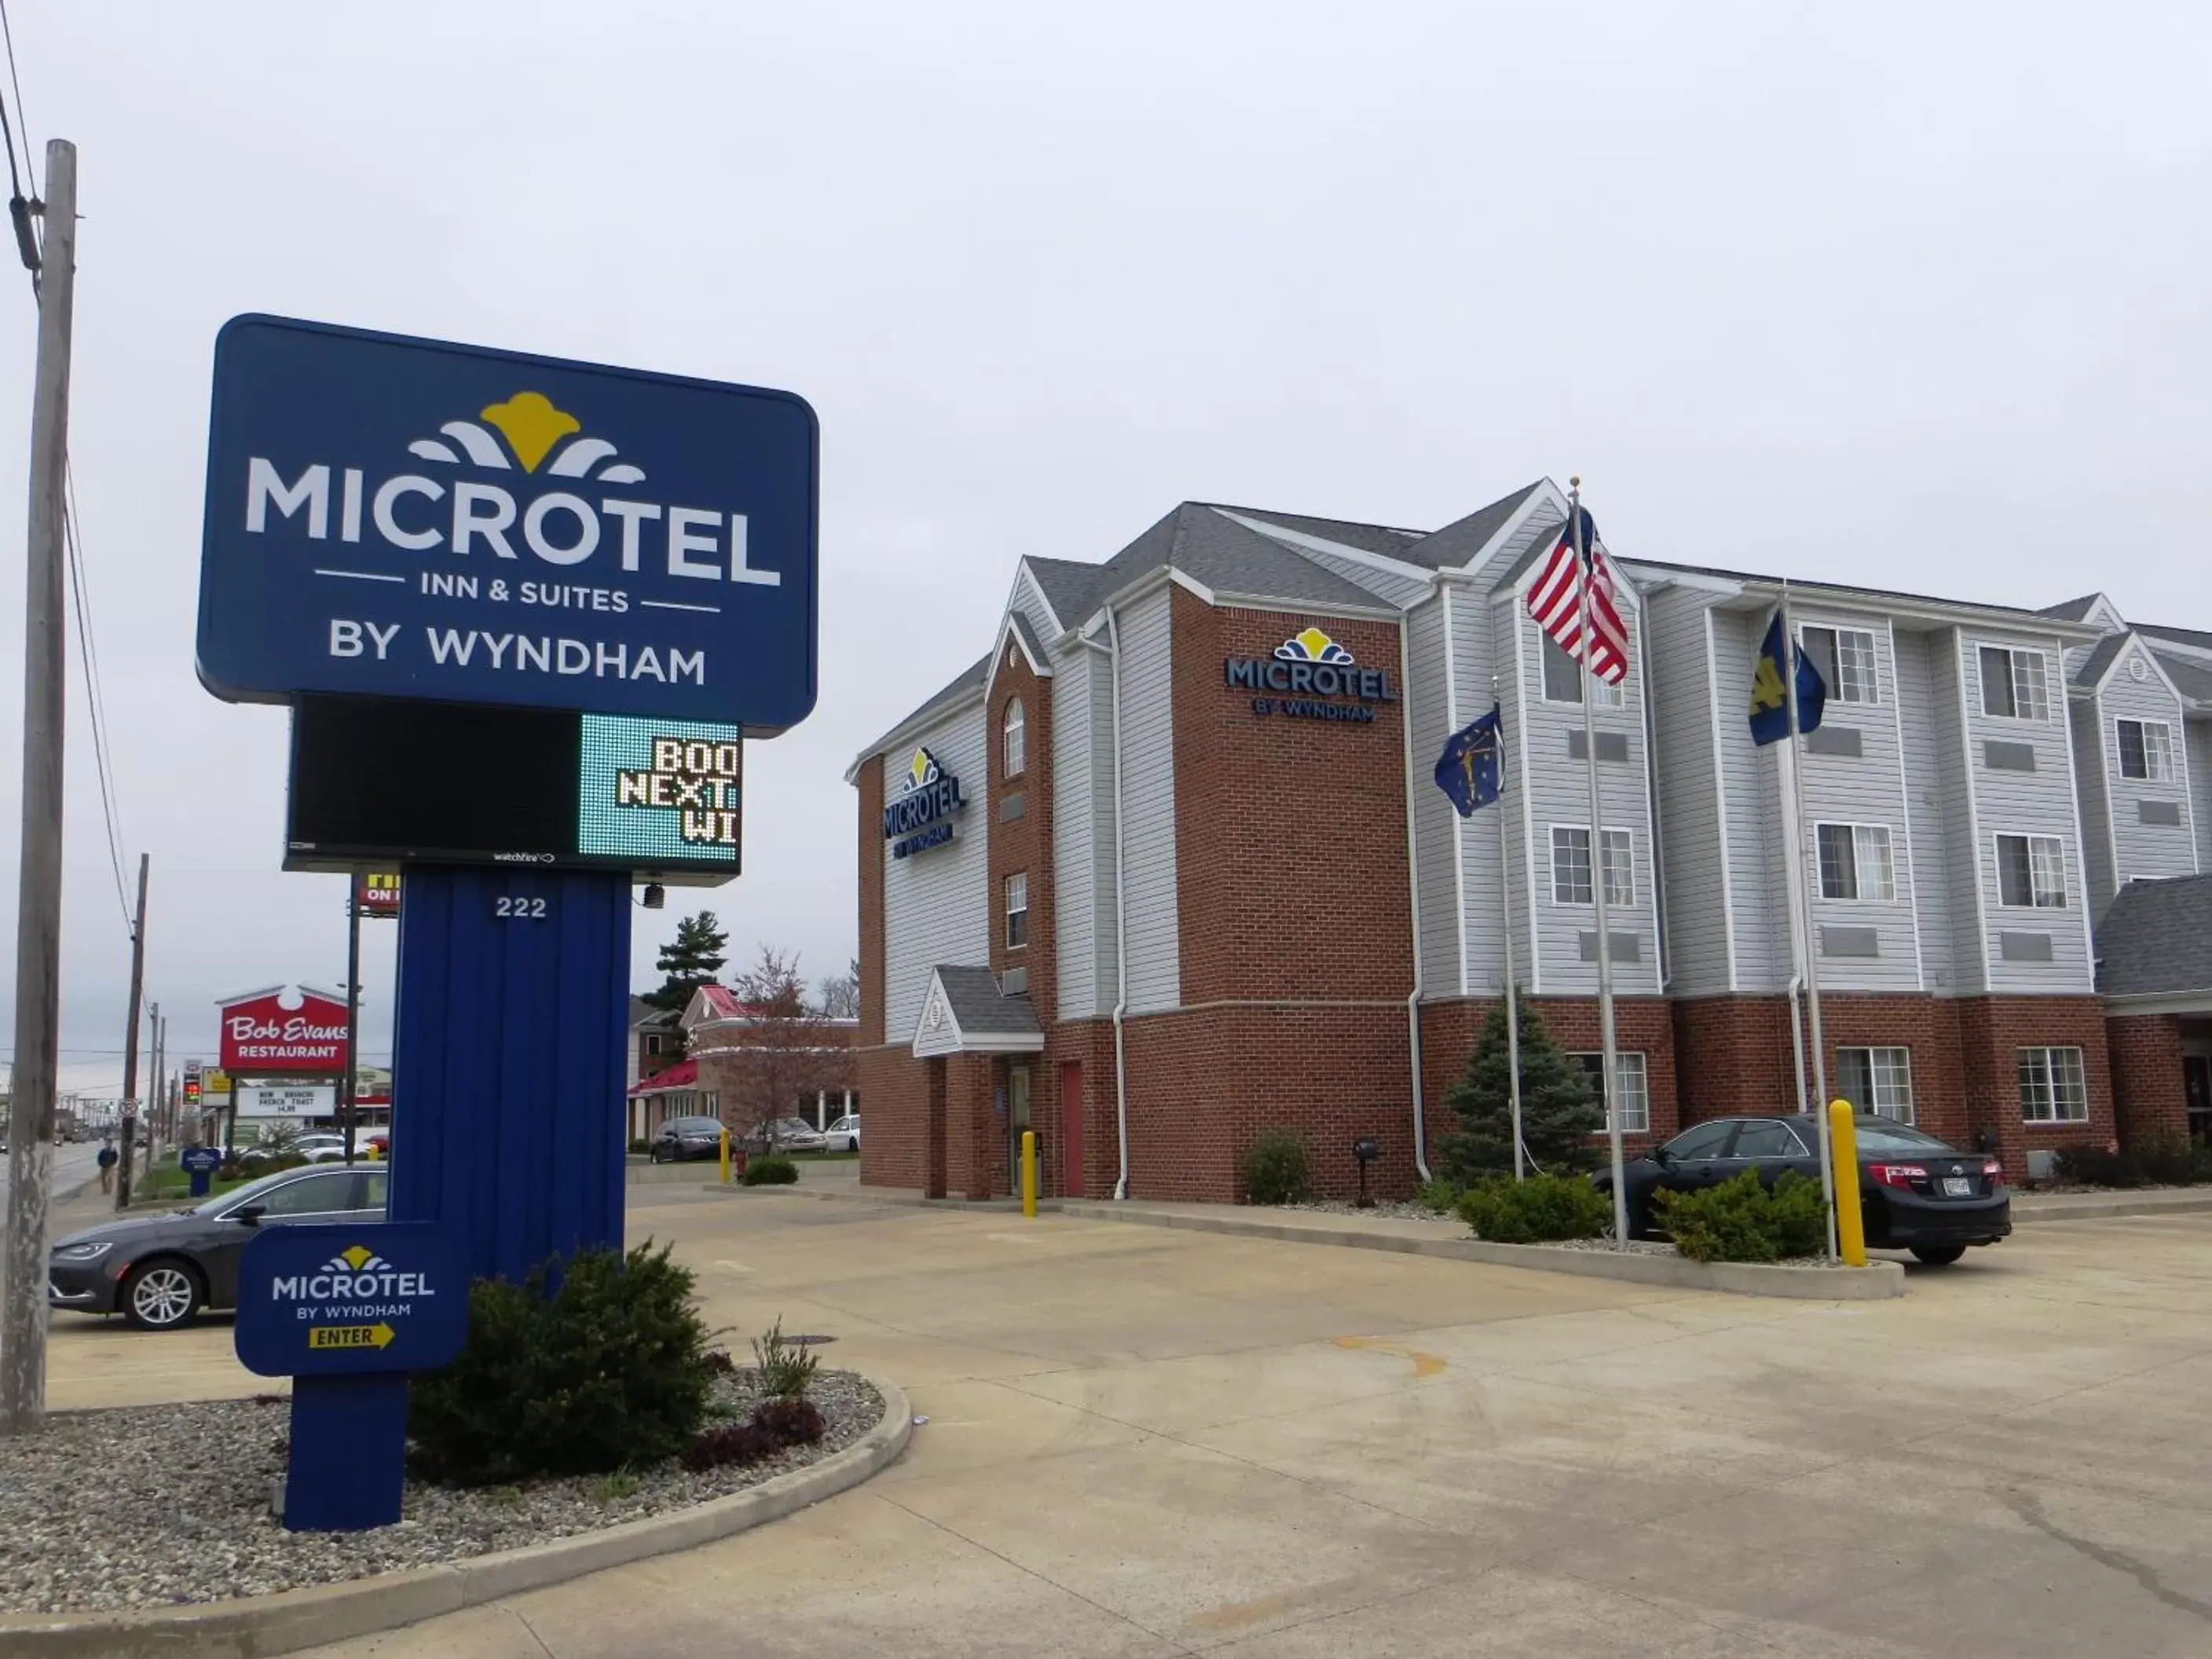 Property building in Microtel by Wyndham South Bend Notre Dame University